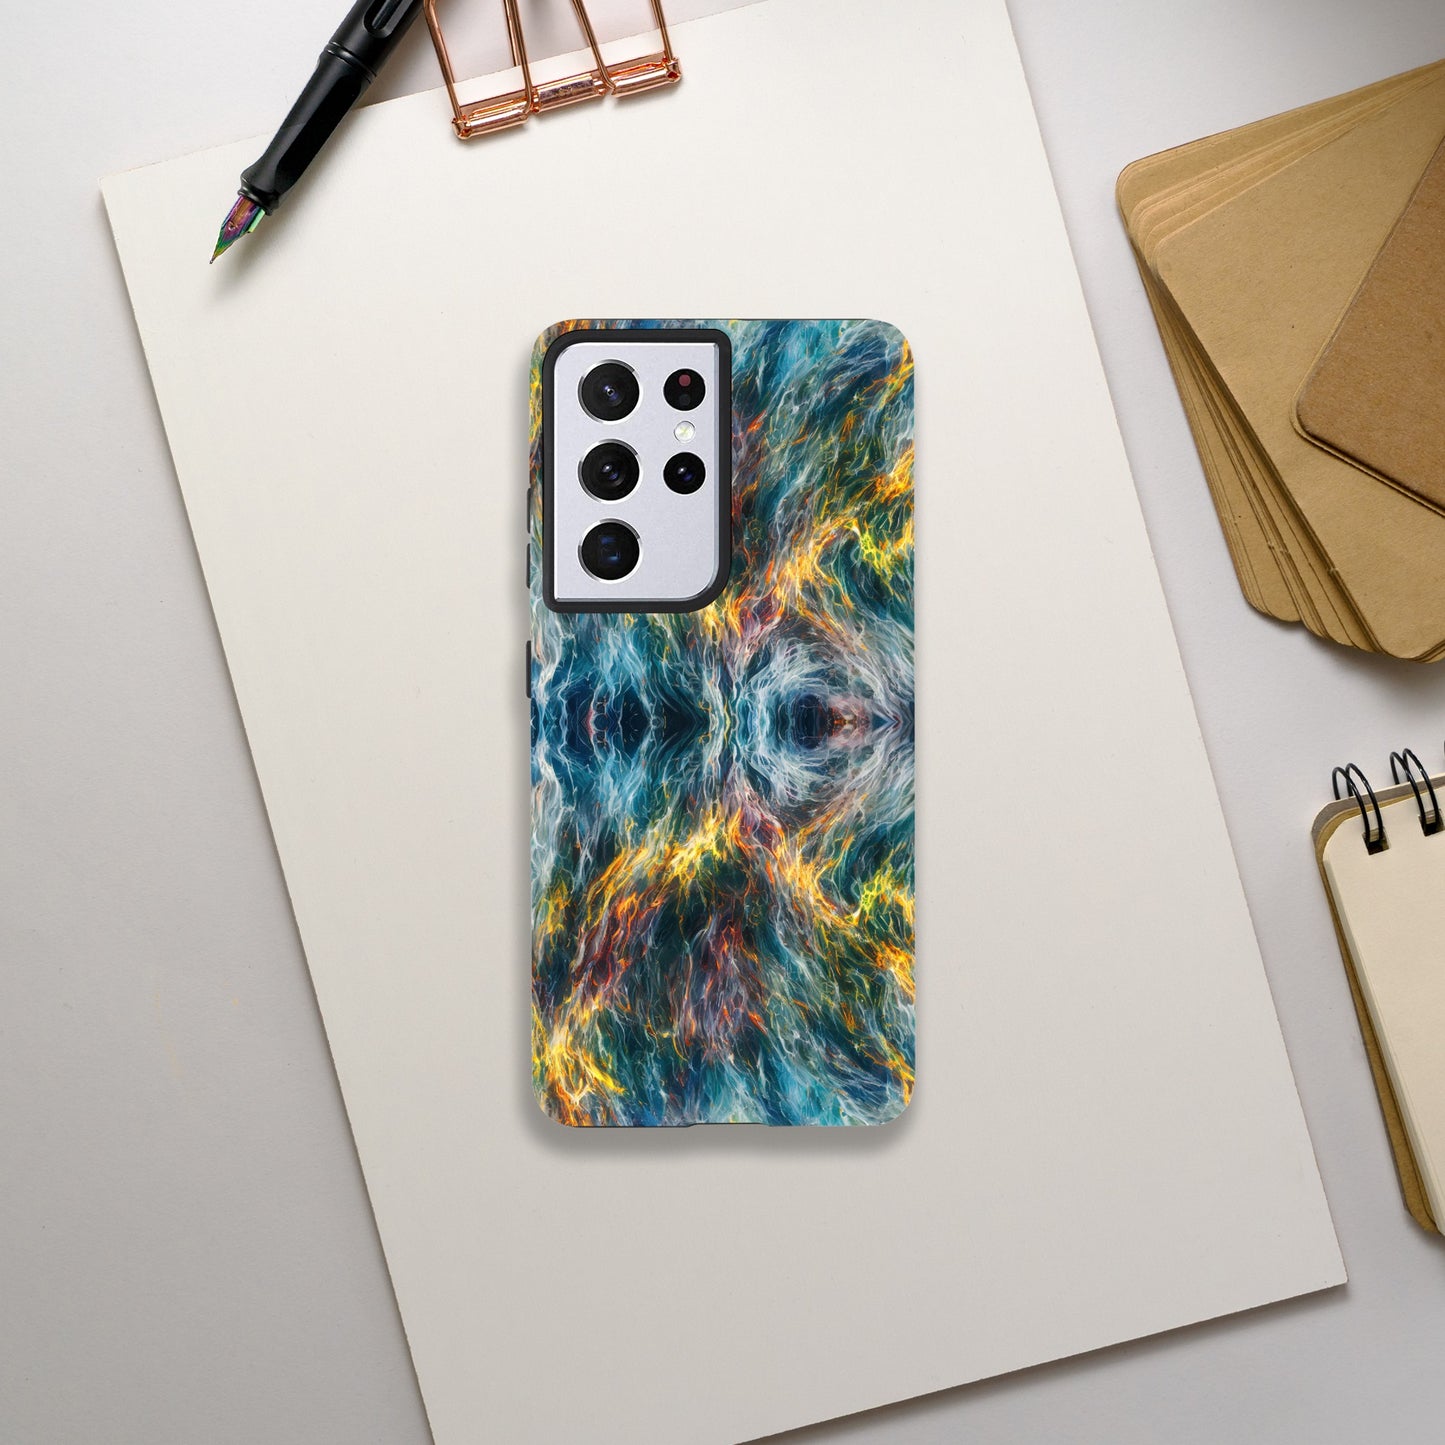 Distorted Universe : Andriod Tough case